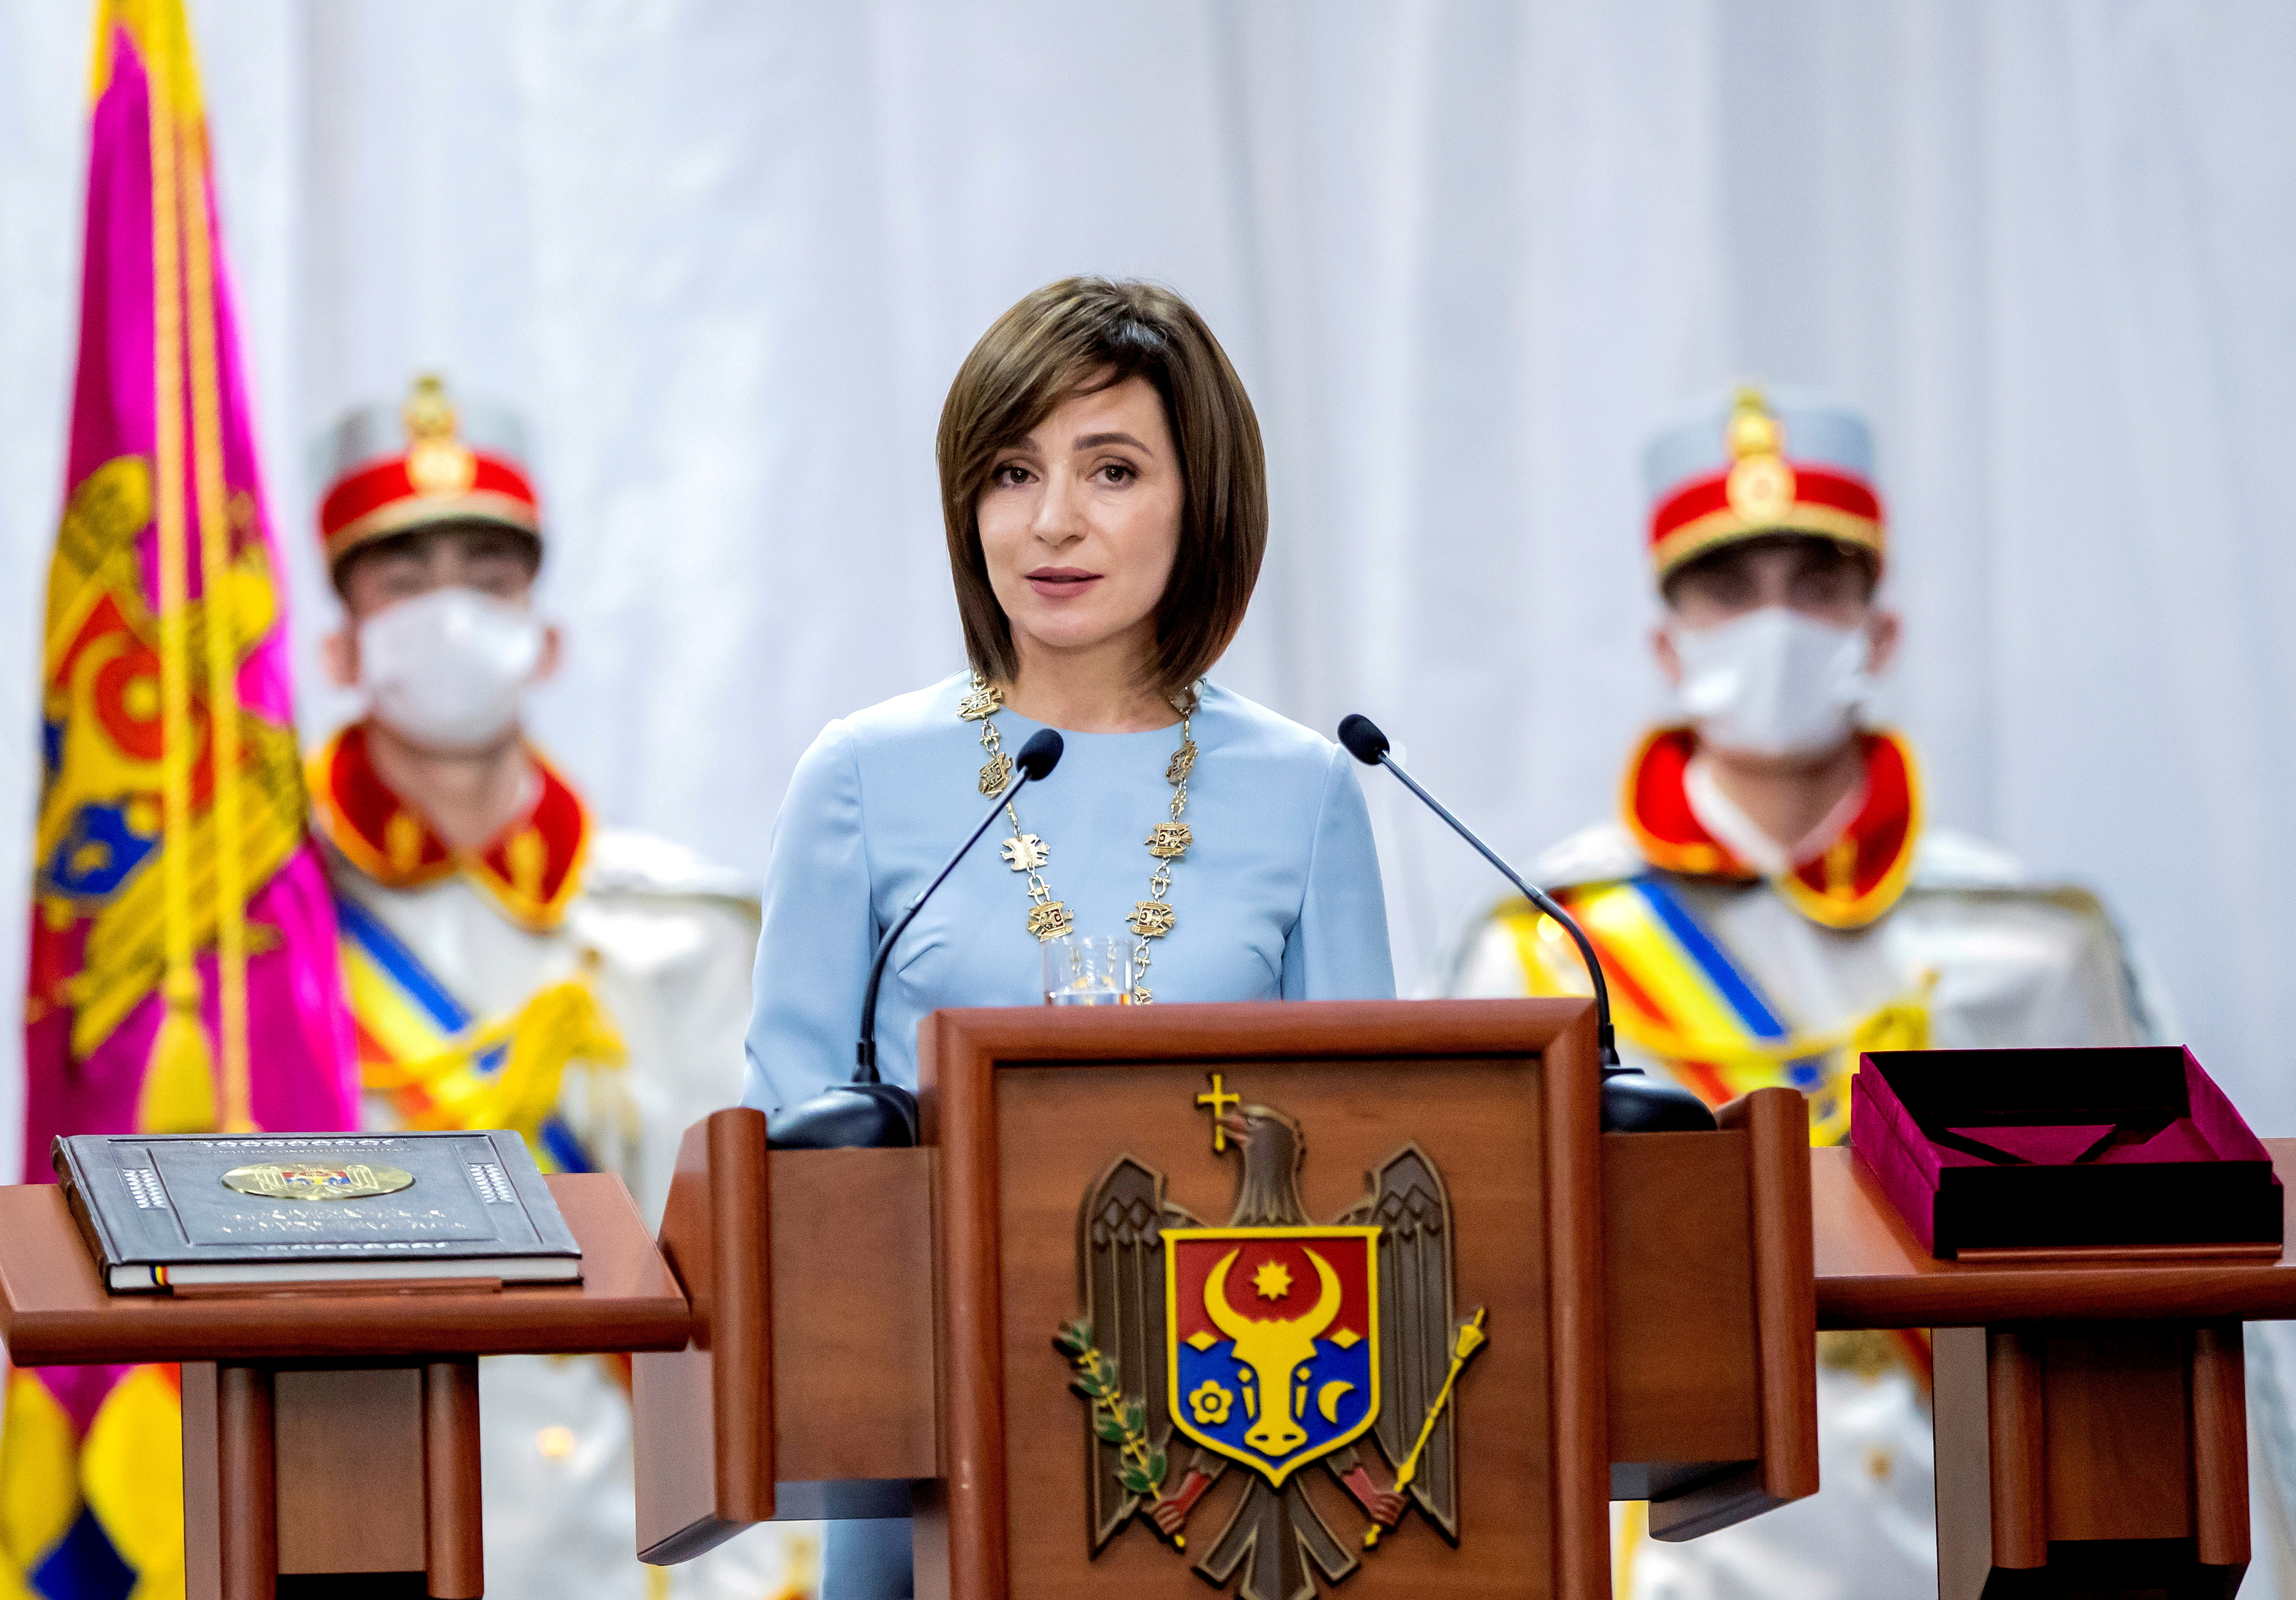 FILE PHOTO: Moldovan President Maia Sandu delivers a speech during an inauguration ceremony in Chisinau